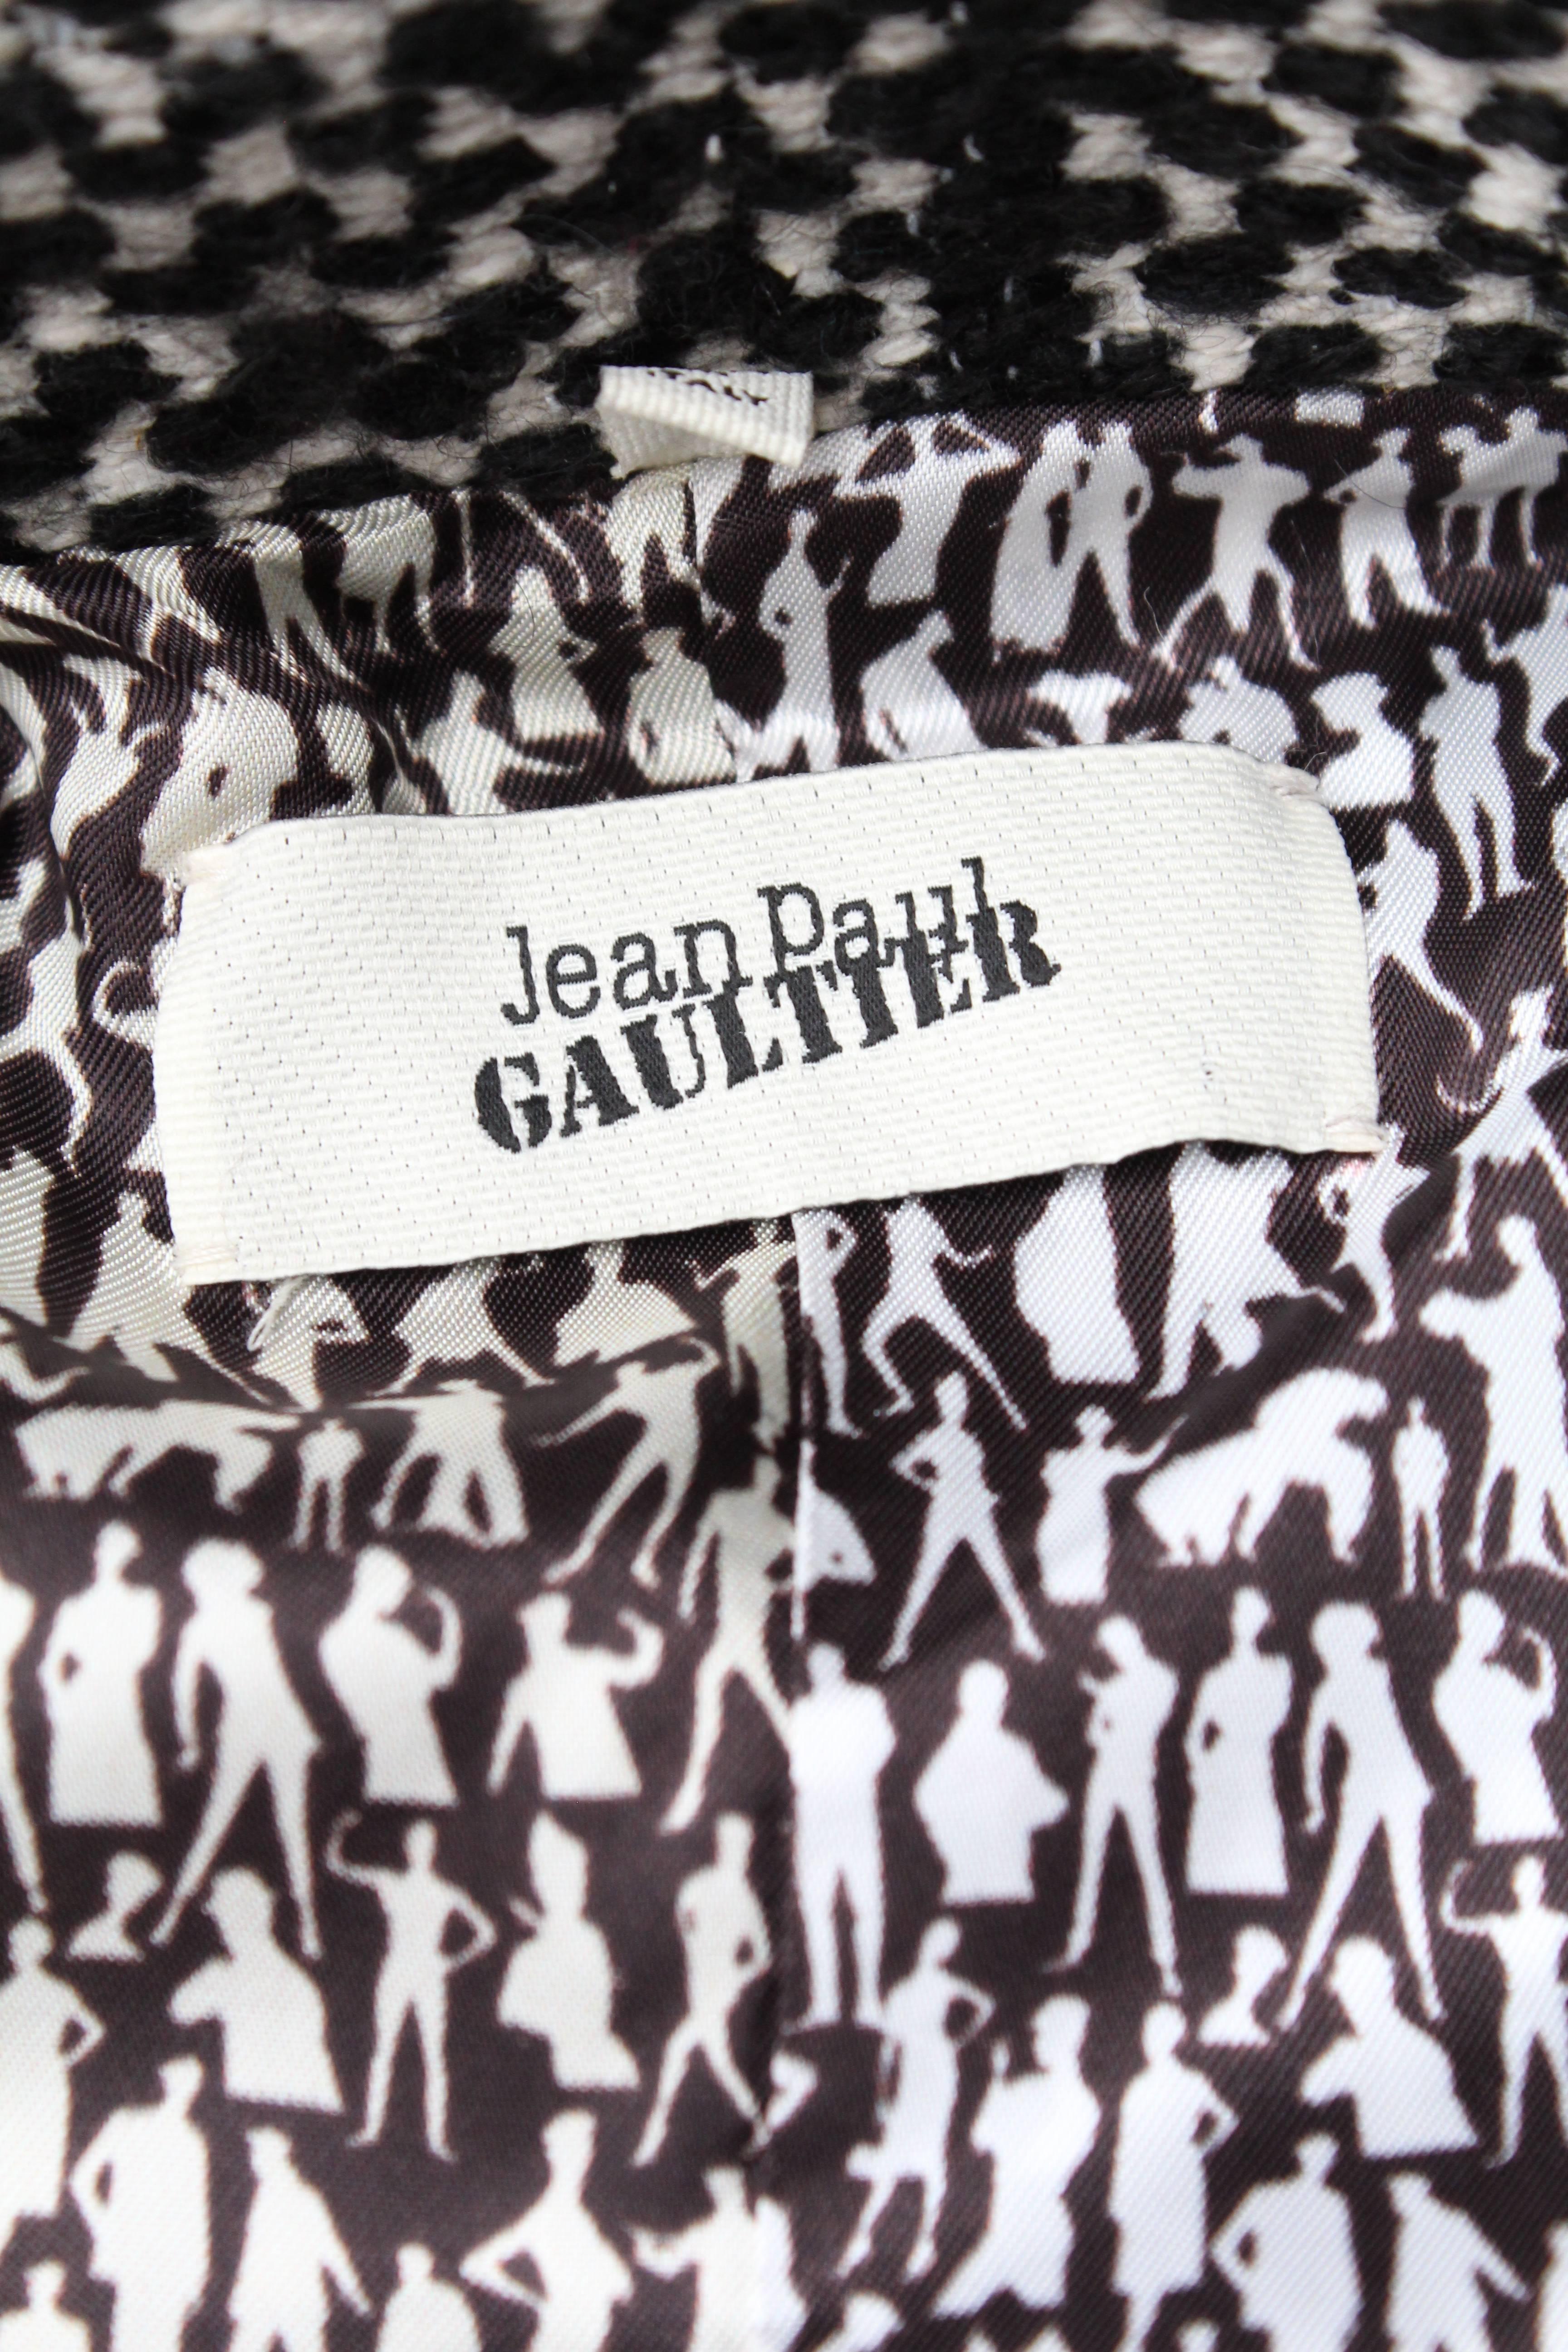 Fall 2013 Jean Paul Gaultier Black and White Coat 5